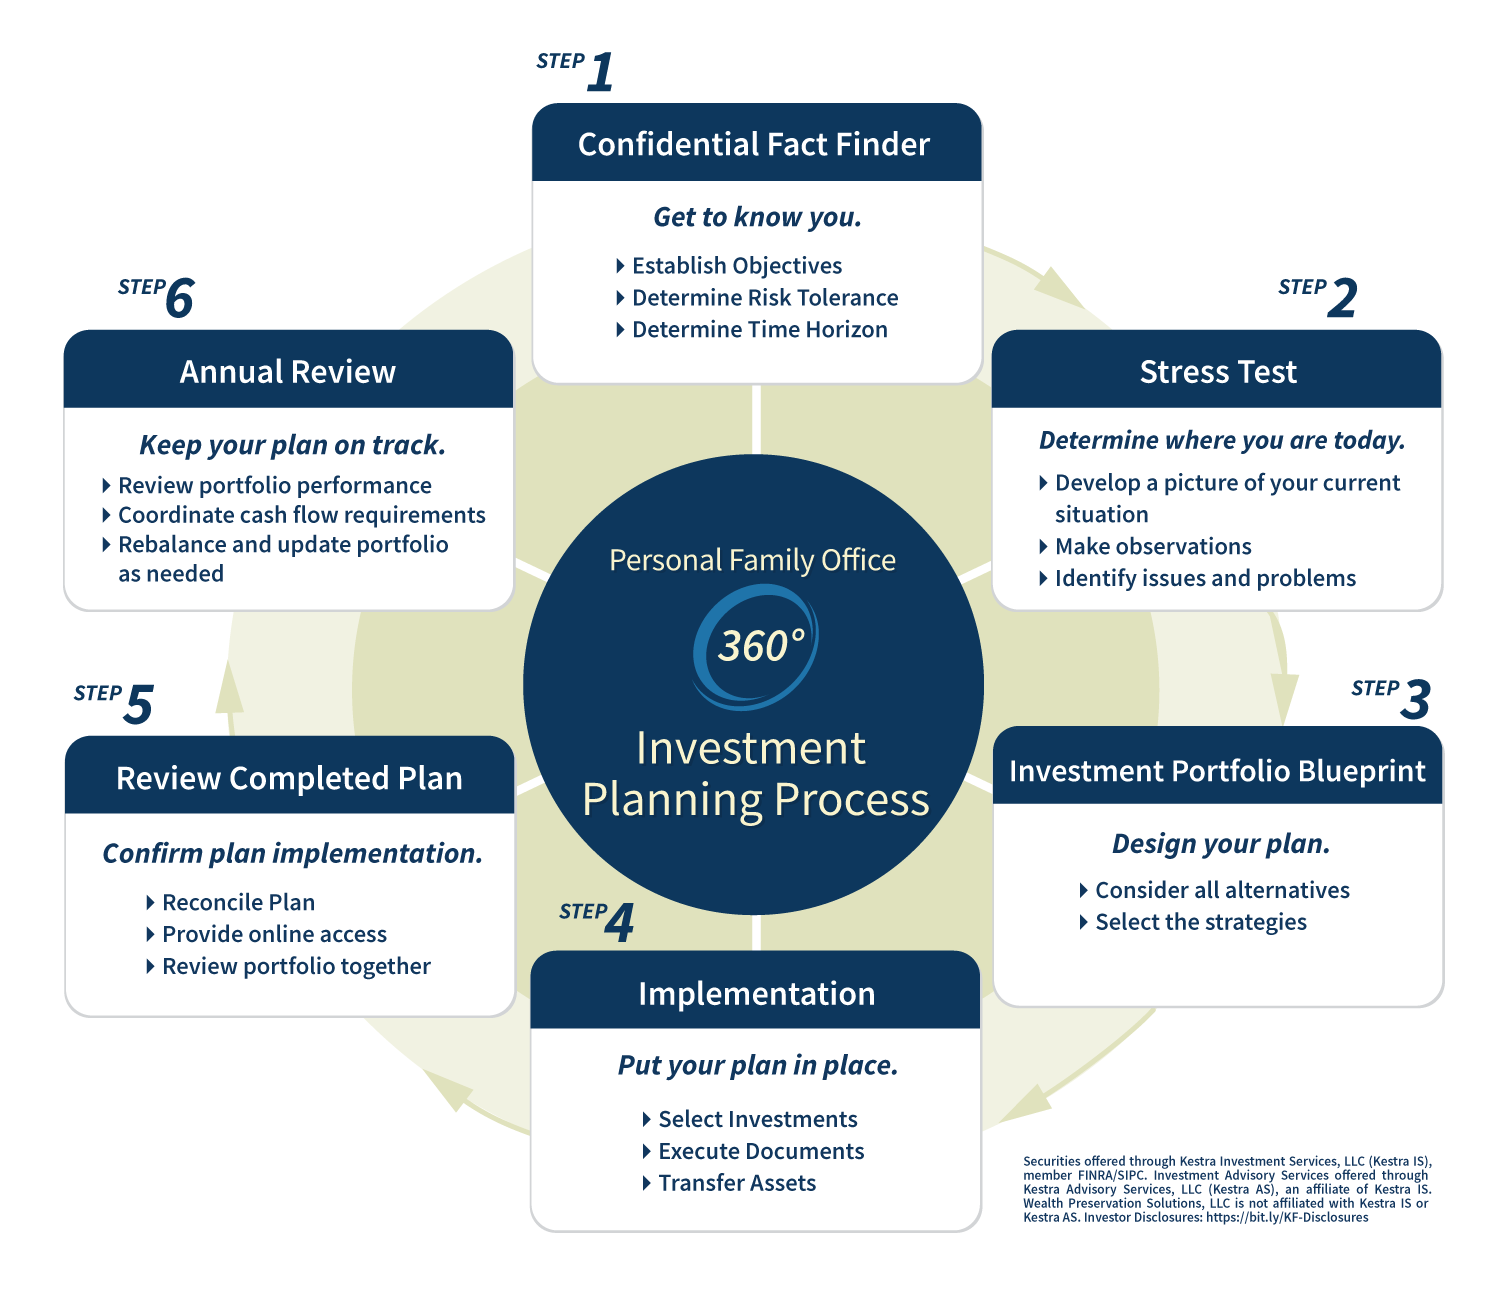 Investment Planning Process Wealth Preservation Solutions